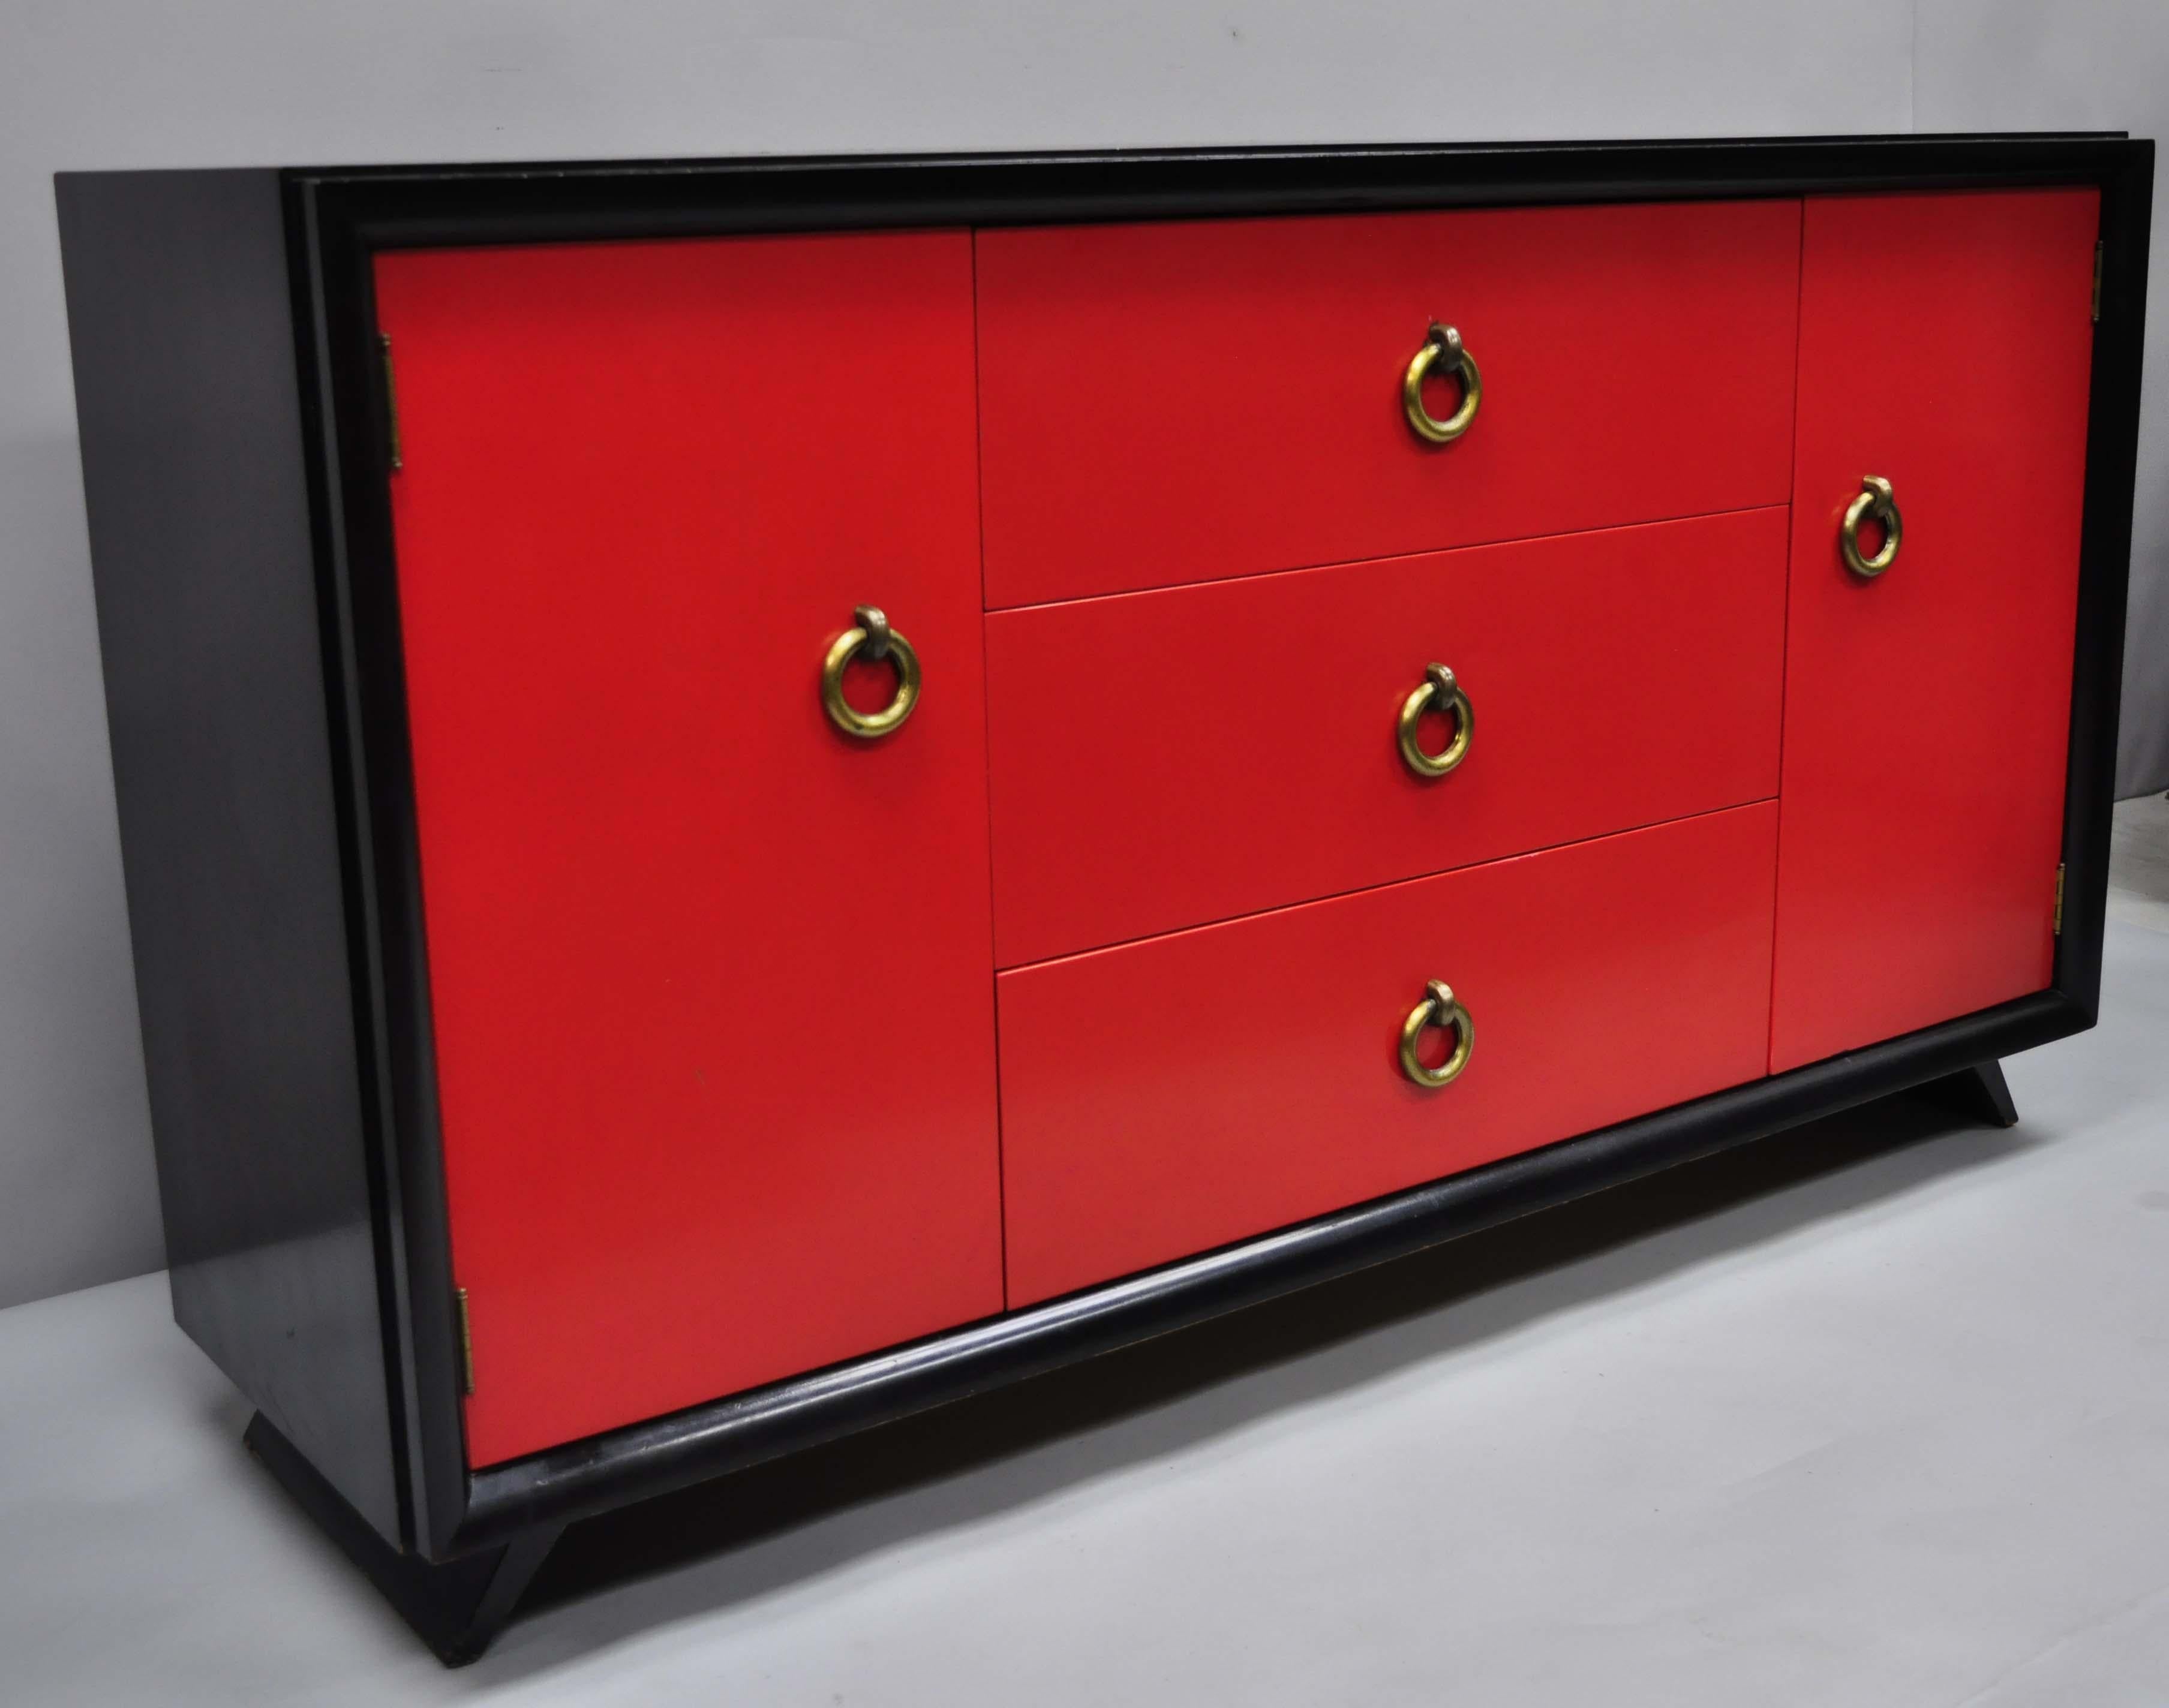 Vintage Mid-Century Modern Art Deco black and red credenza cabinet sideboard by Harjer furniture ltd. Item features heavy drop brass ring pulls, black and red lacquer finish, 2 swing doors, original label, 3 drawers, clean modernist lines, quality